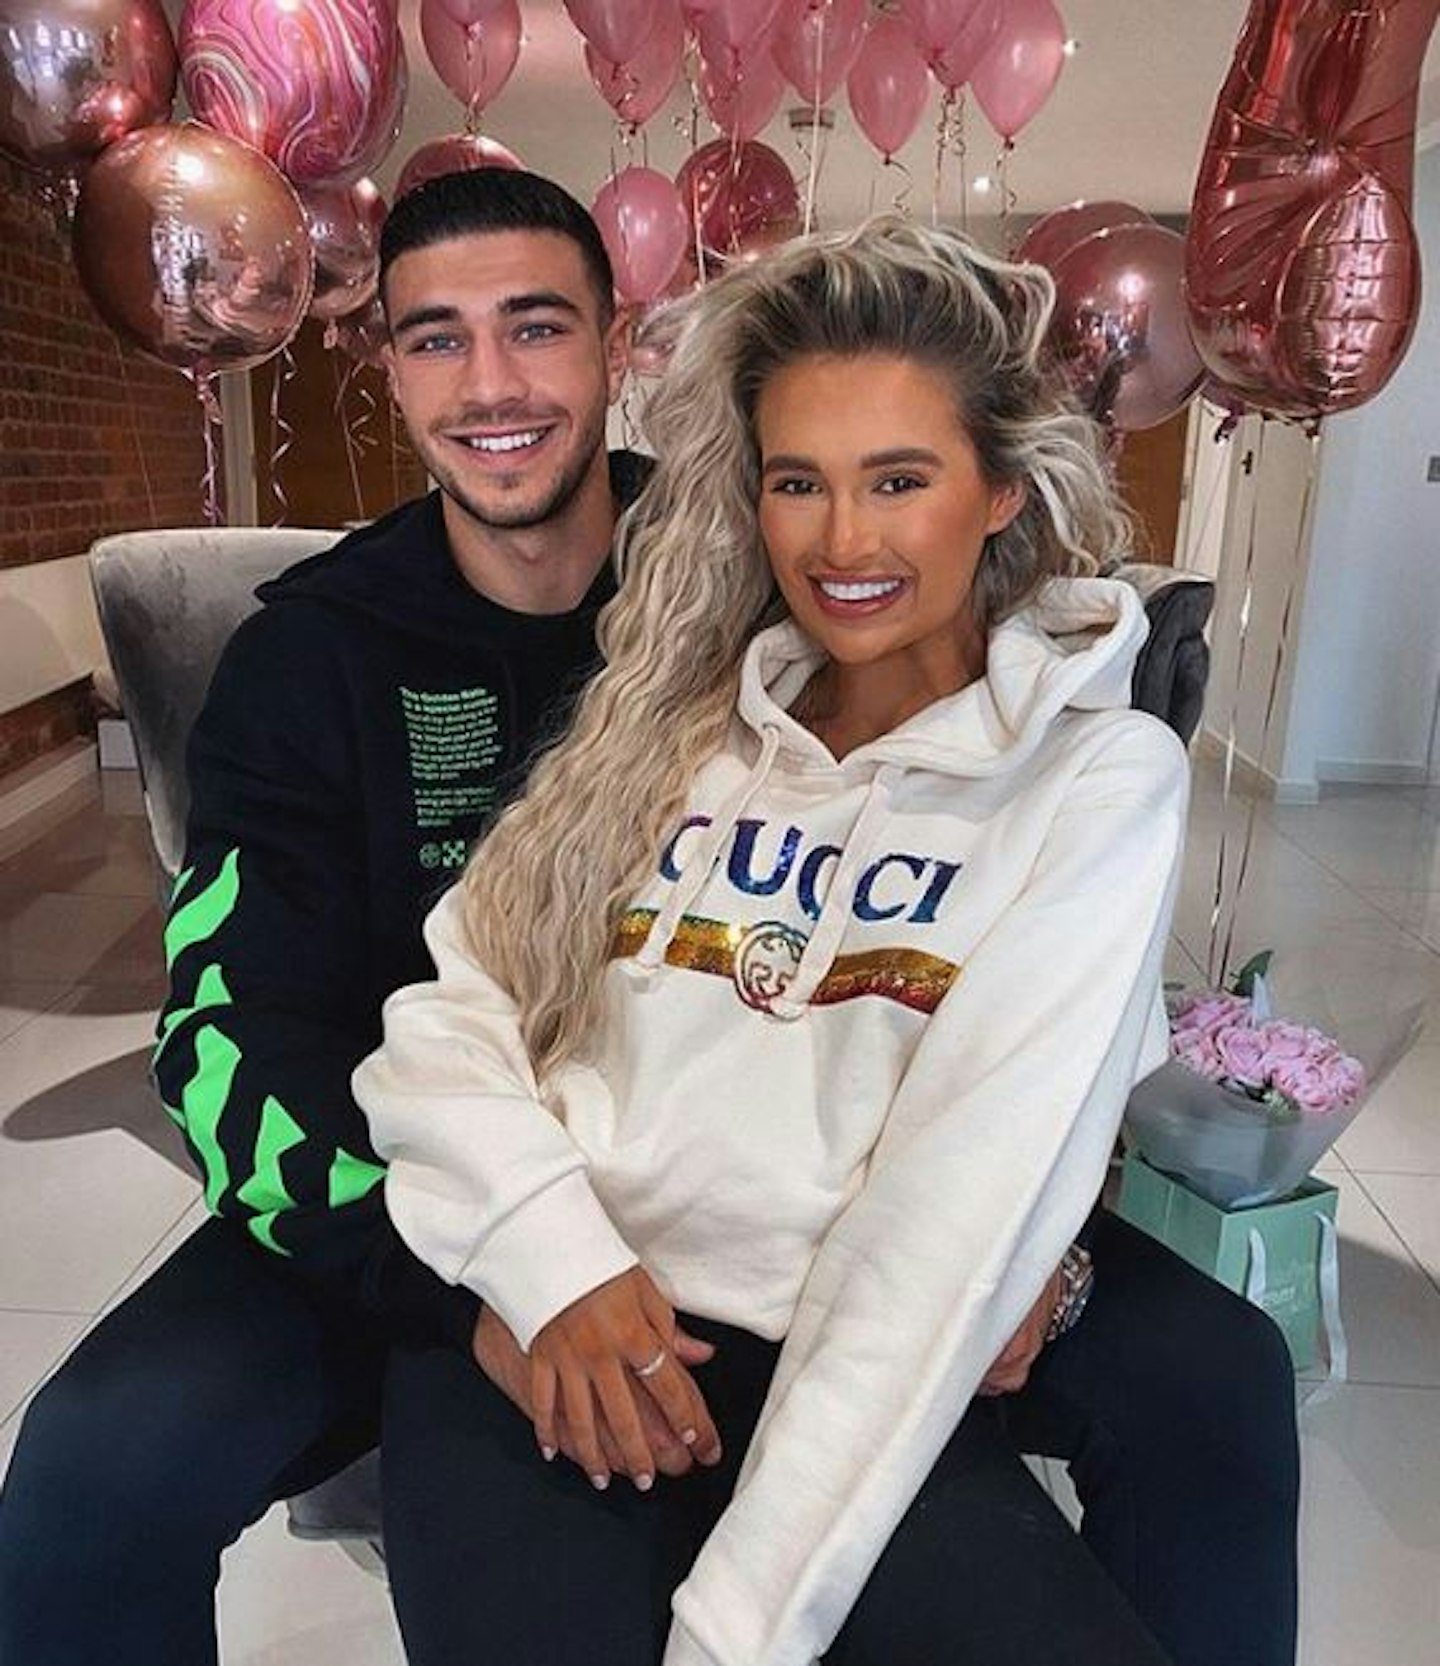 TOMMY FURY AND MOLLY-MAE HAGUE